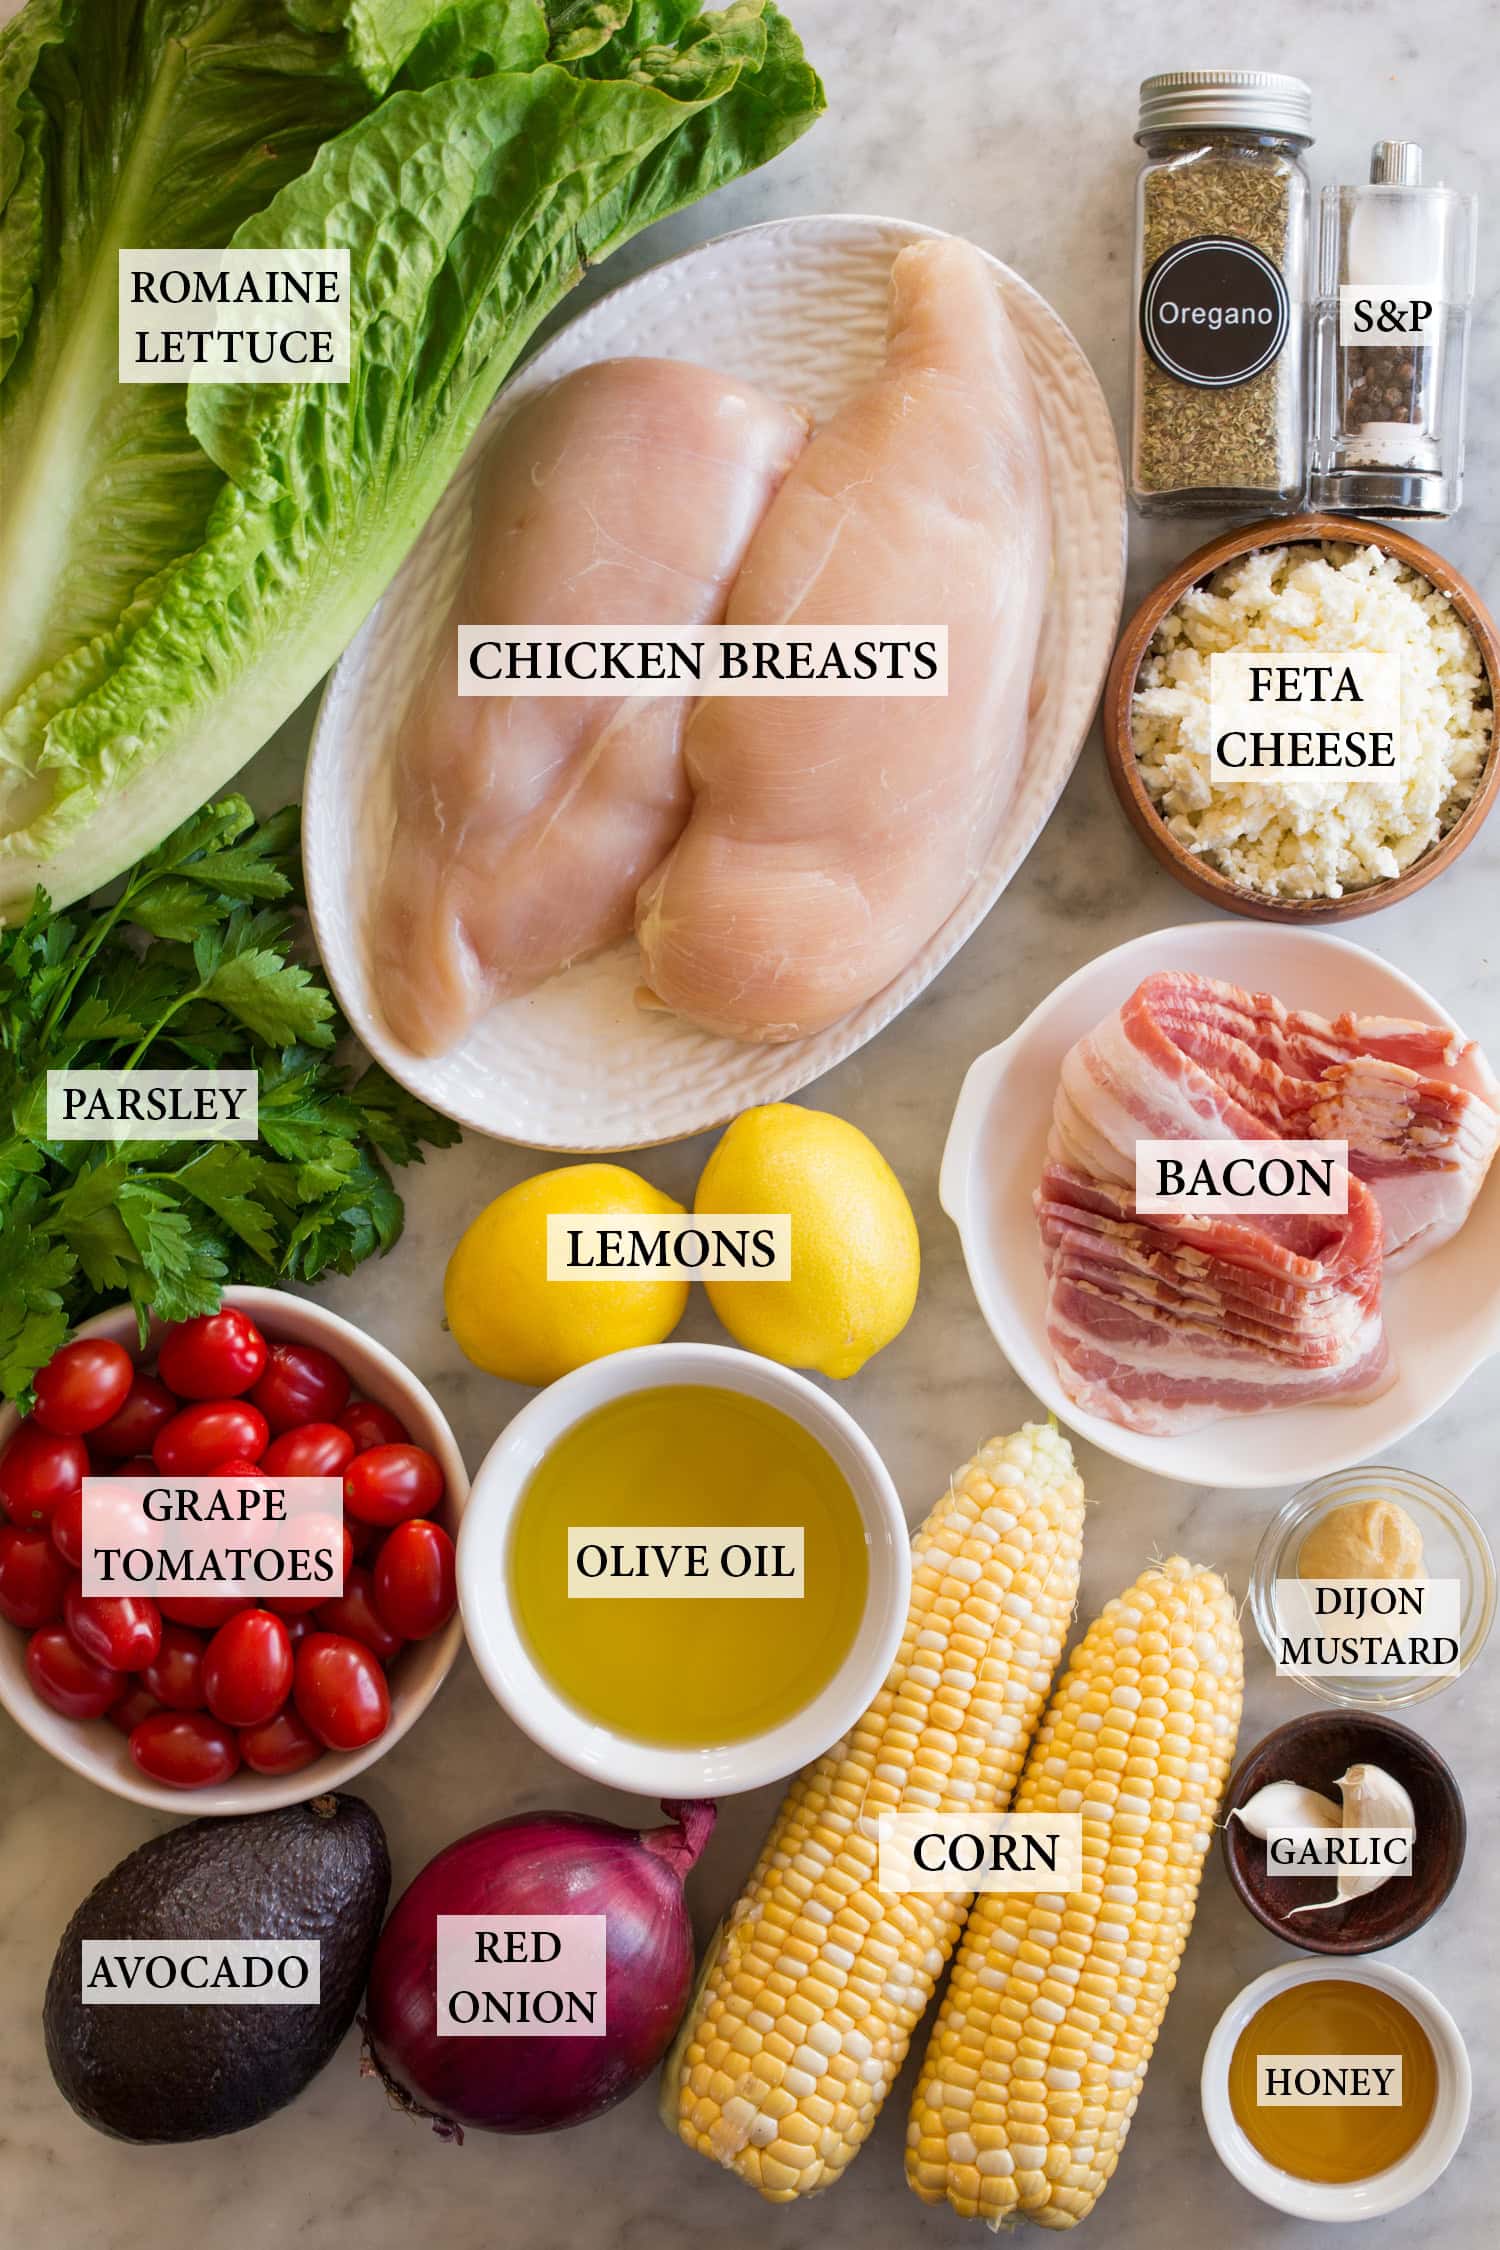 Ingredients used to make a grilled chicken salad.